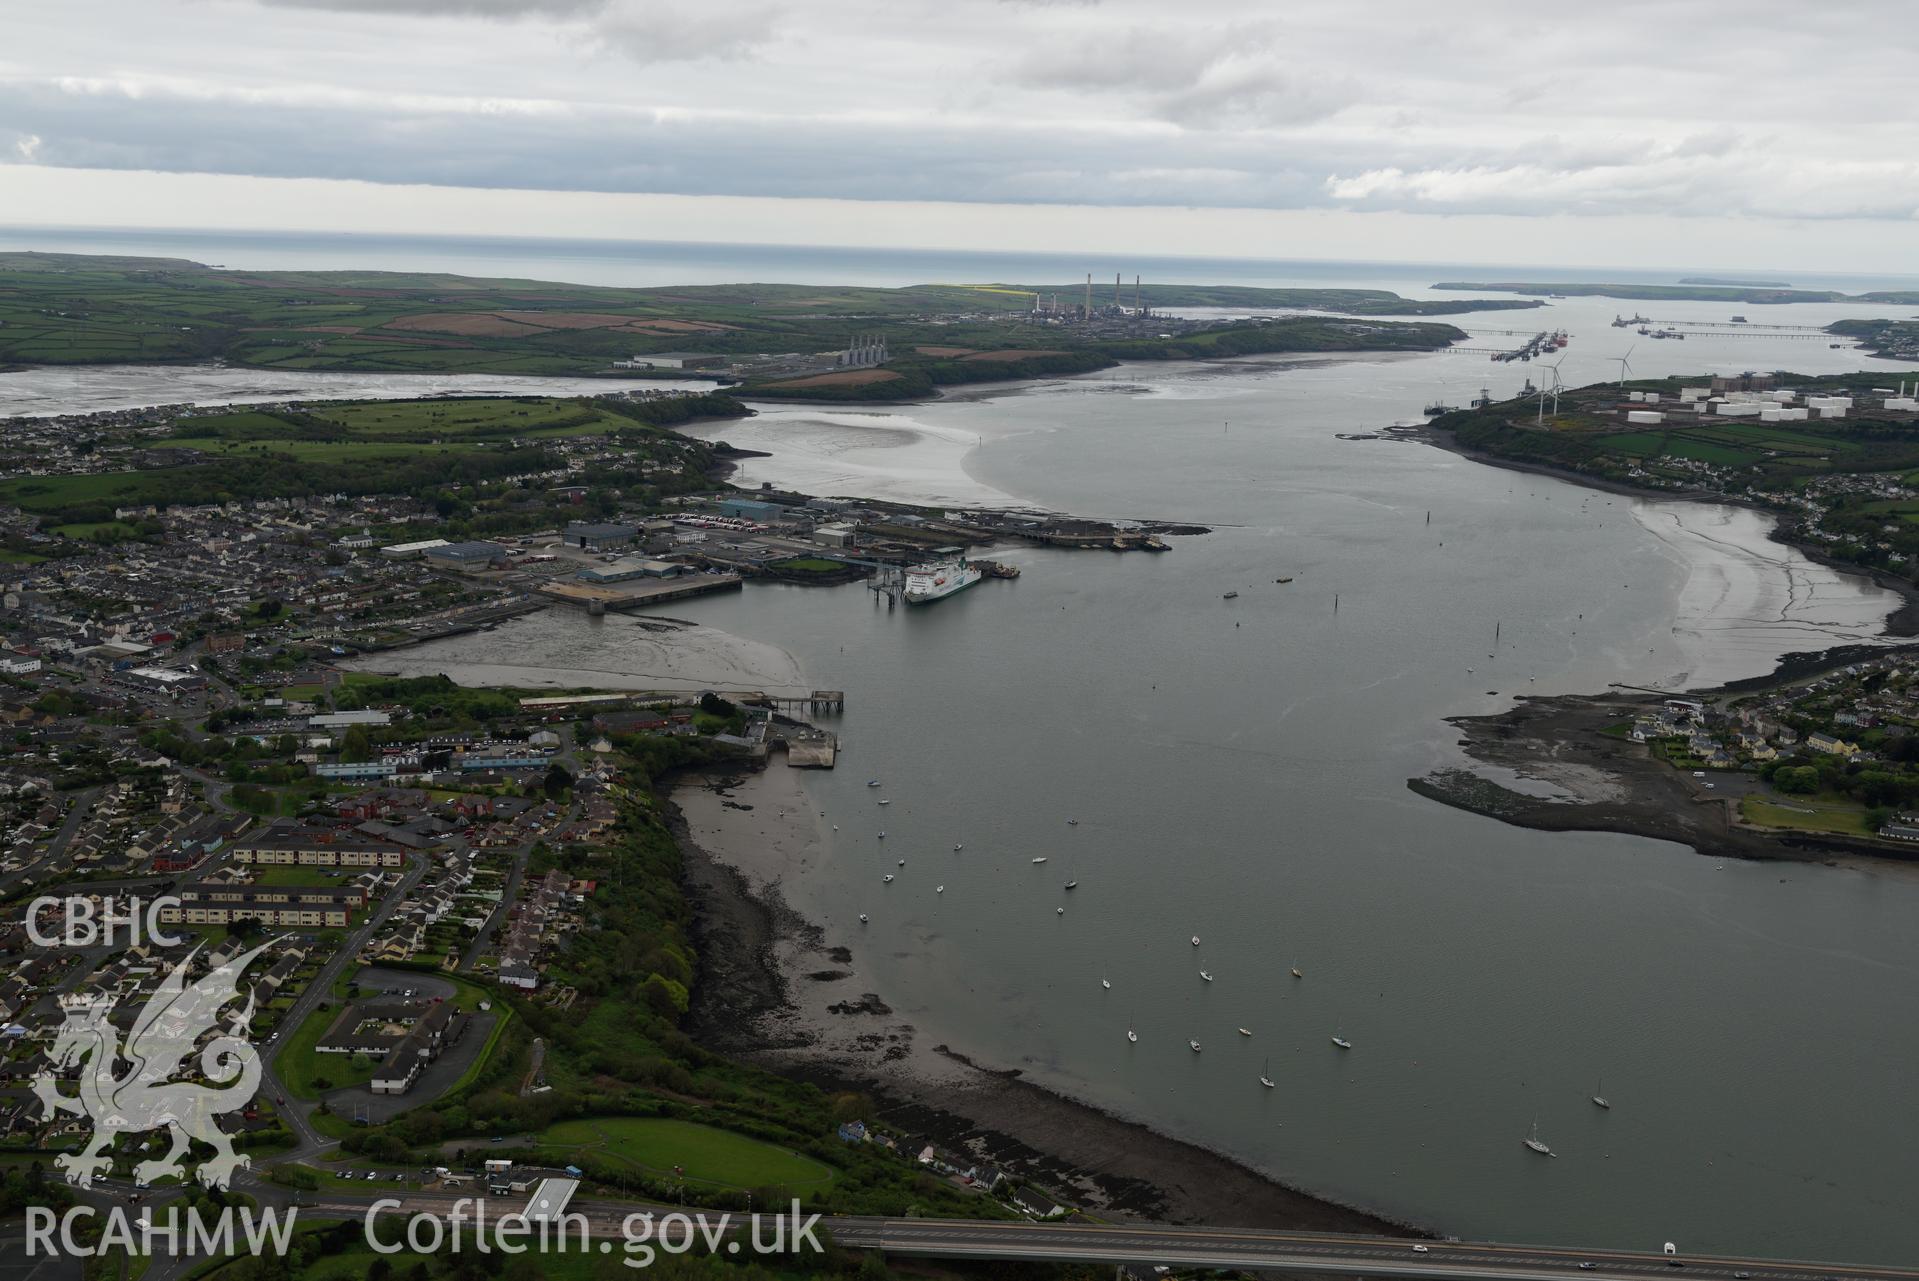 Neyland embarkation hards, at low tide. Baseline aerial reconnaissance survey for the CHERISH Project. ? Crown: CHERISH PROJECT 2017. Produced with EU funds through the Ireland Wales Co-operation Programme 2014-2020. All material made freely available through the Open Government Licence.